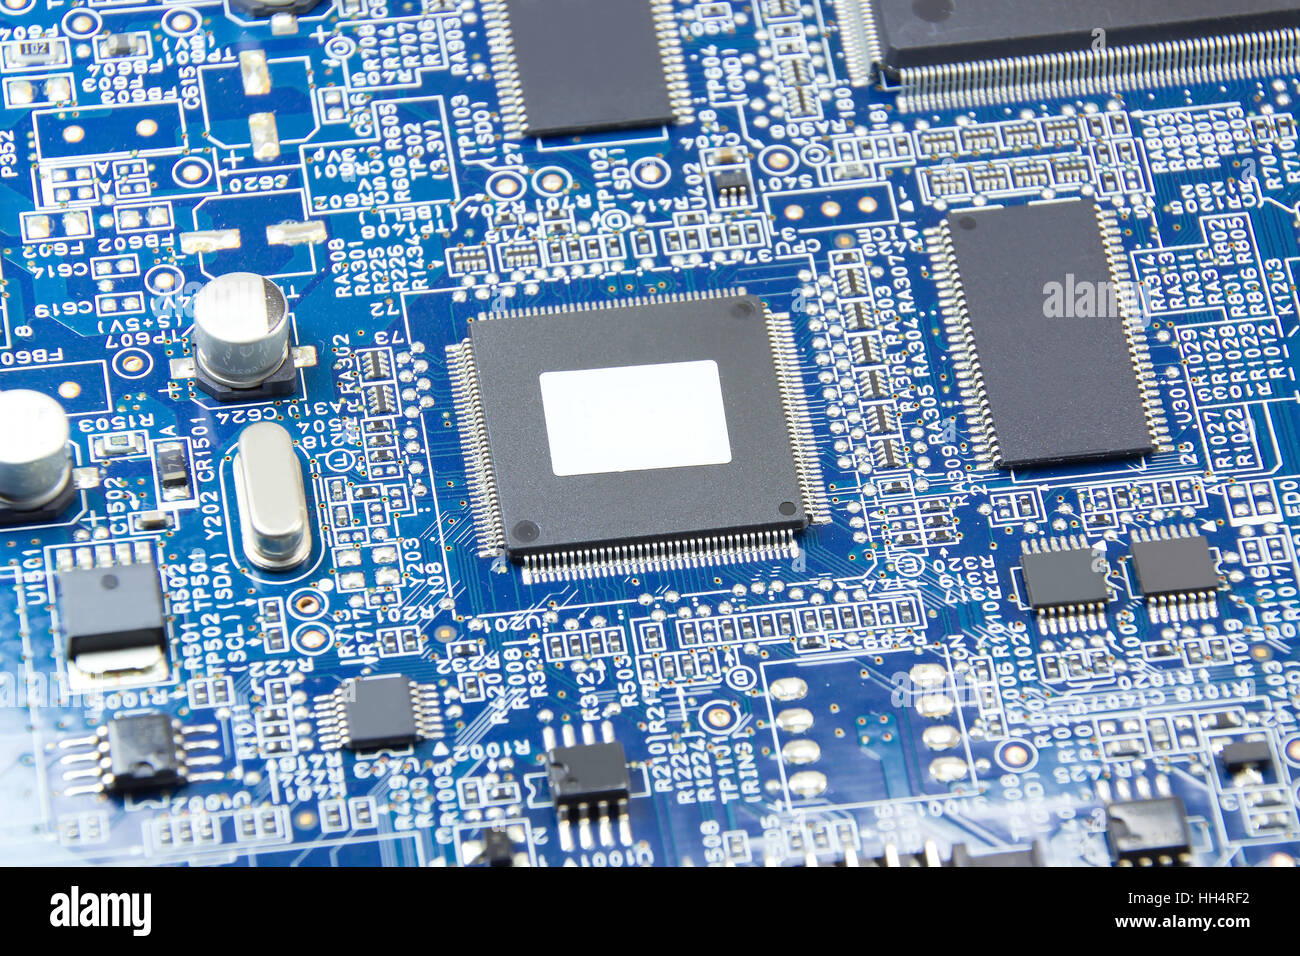 Closed up printed circuit board with electronics components Stock Photo